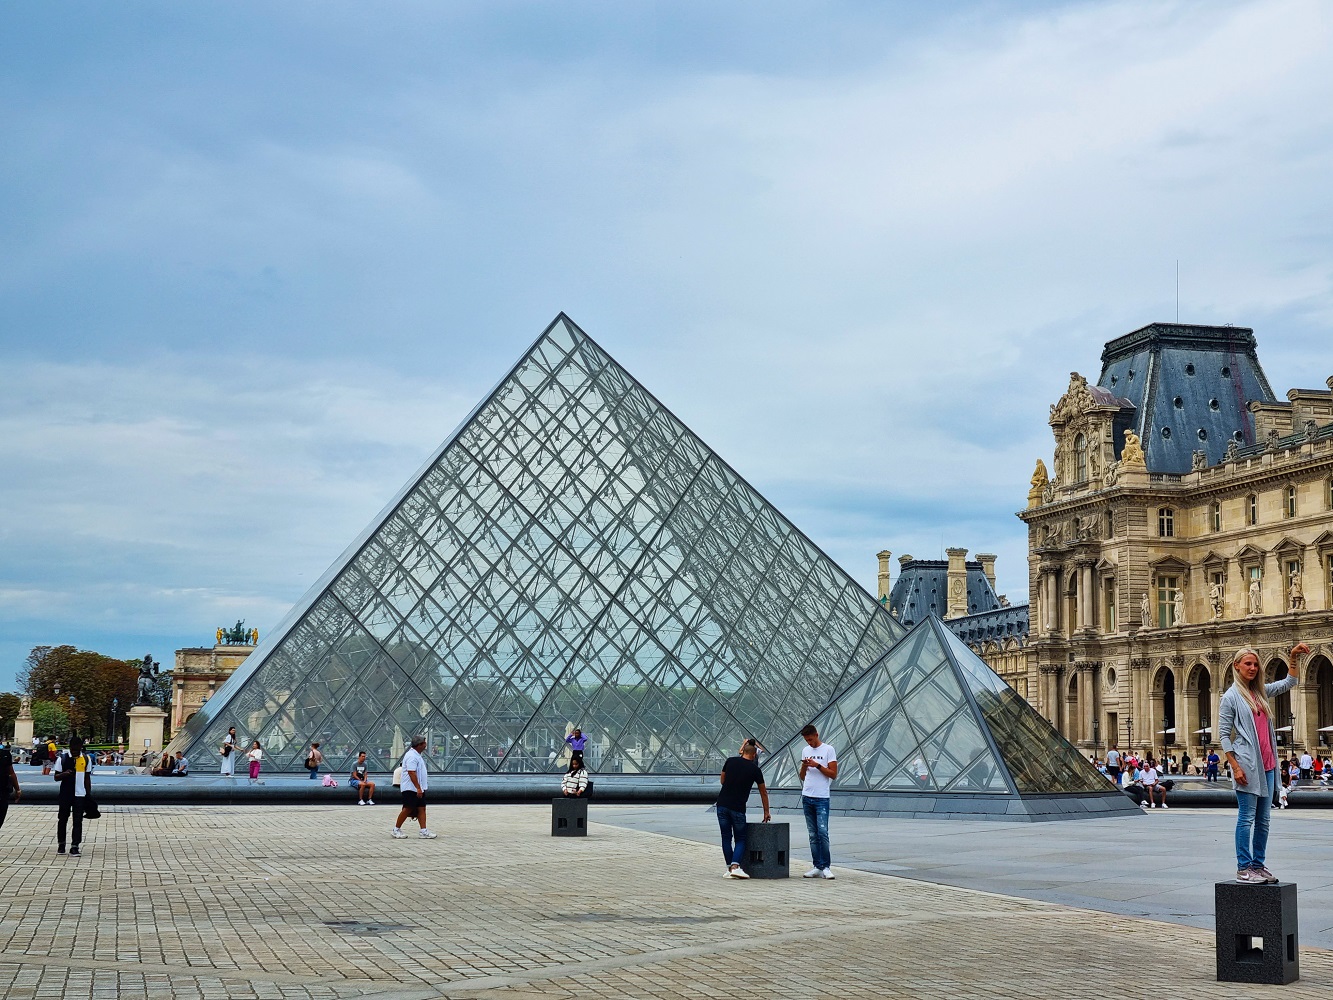 The Louvre